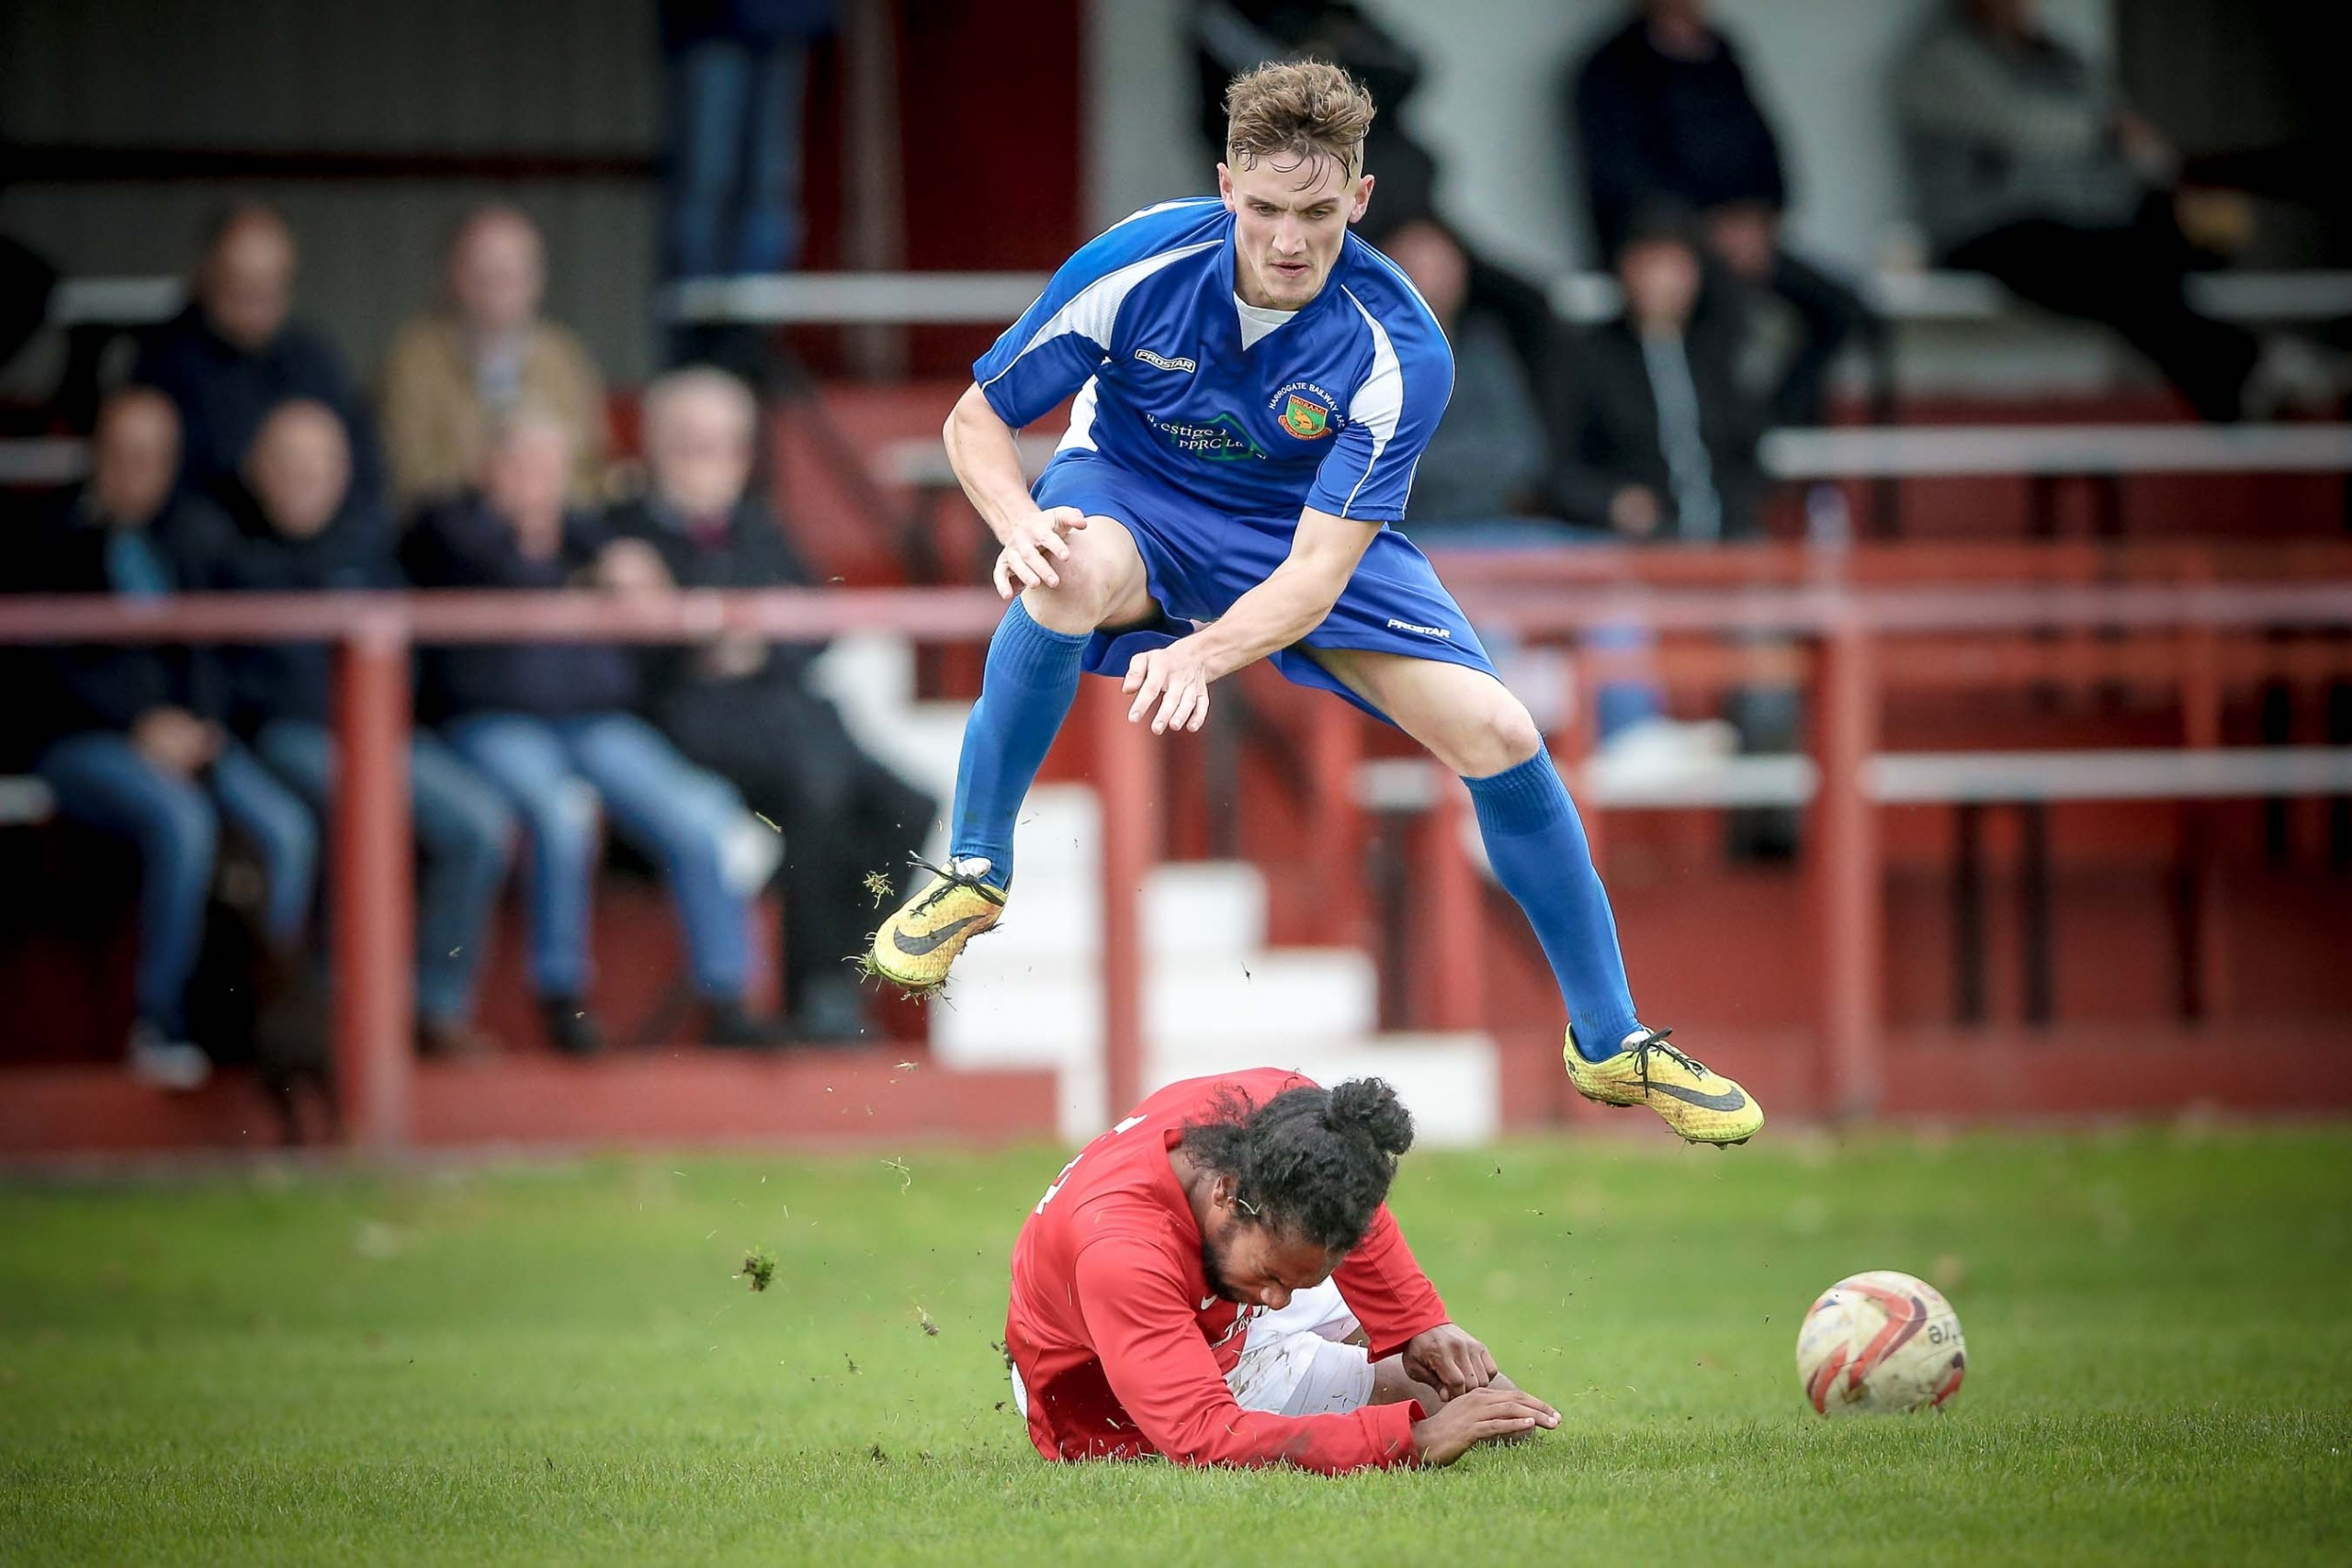 Ryan Sharrocks goes over his opponent rather than around - during Railway's 2-1 loss away to Thackley